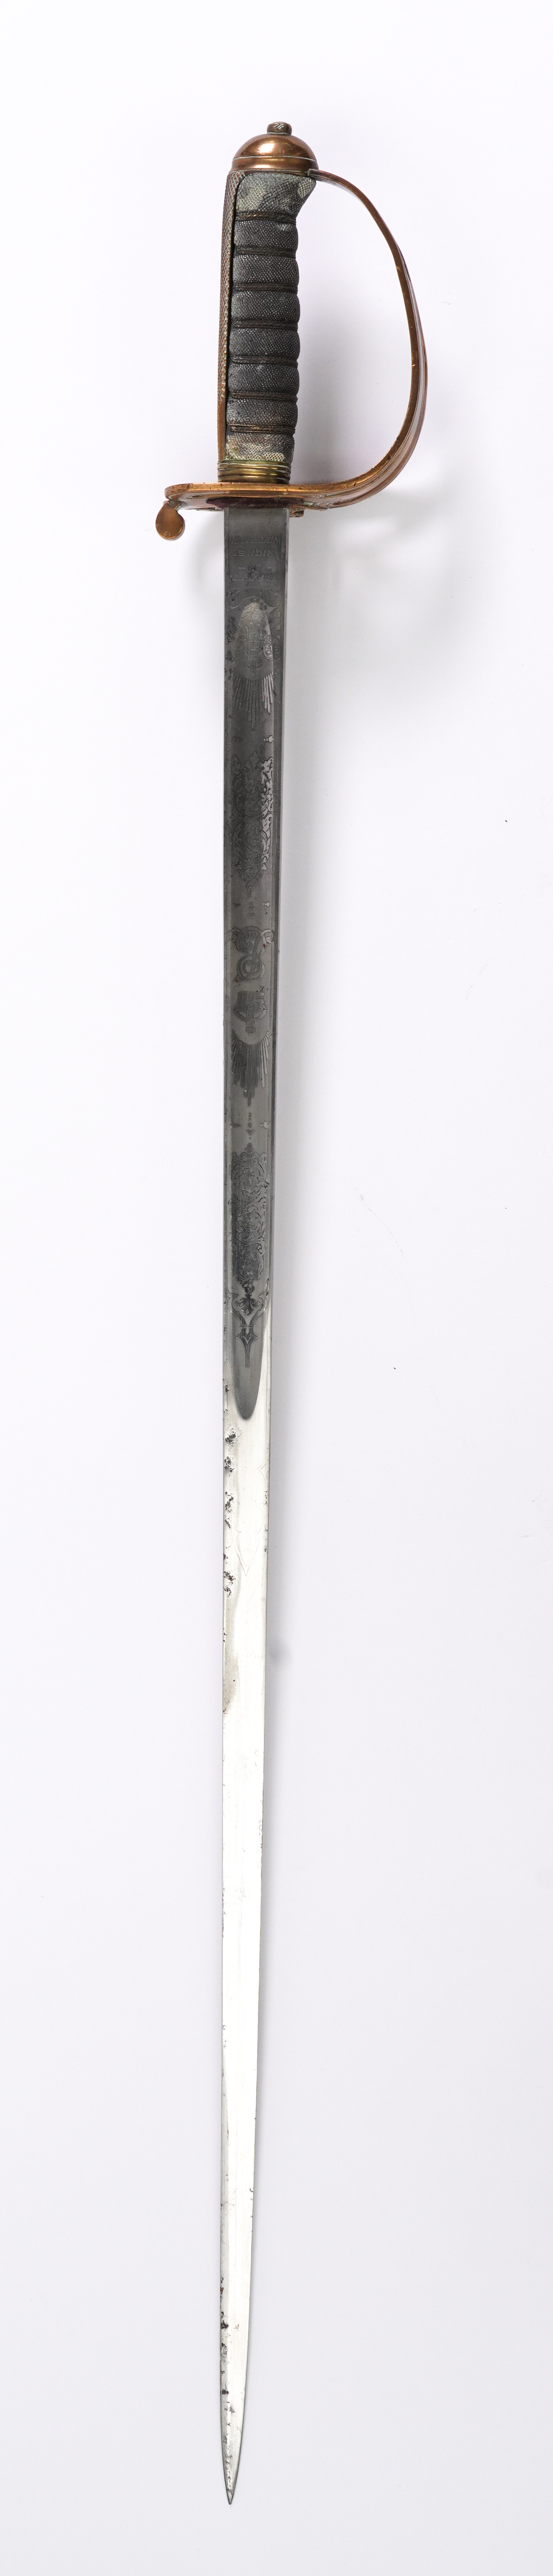 AN EDWARD VII ROYAL ARMY MEDICAL CORPS OFFICER’S SWORD BY F.W. FLIGHT